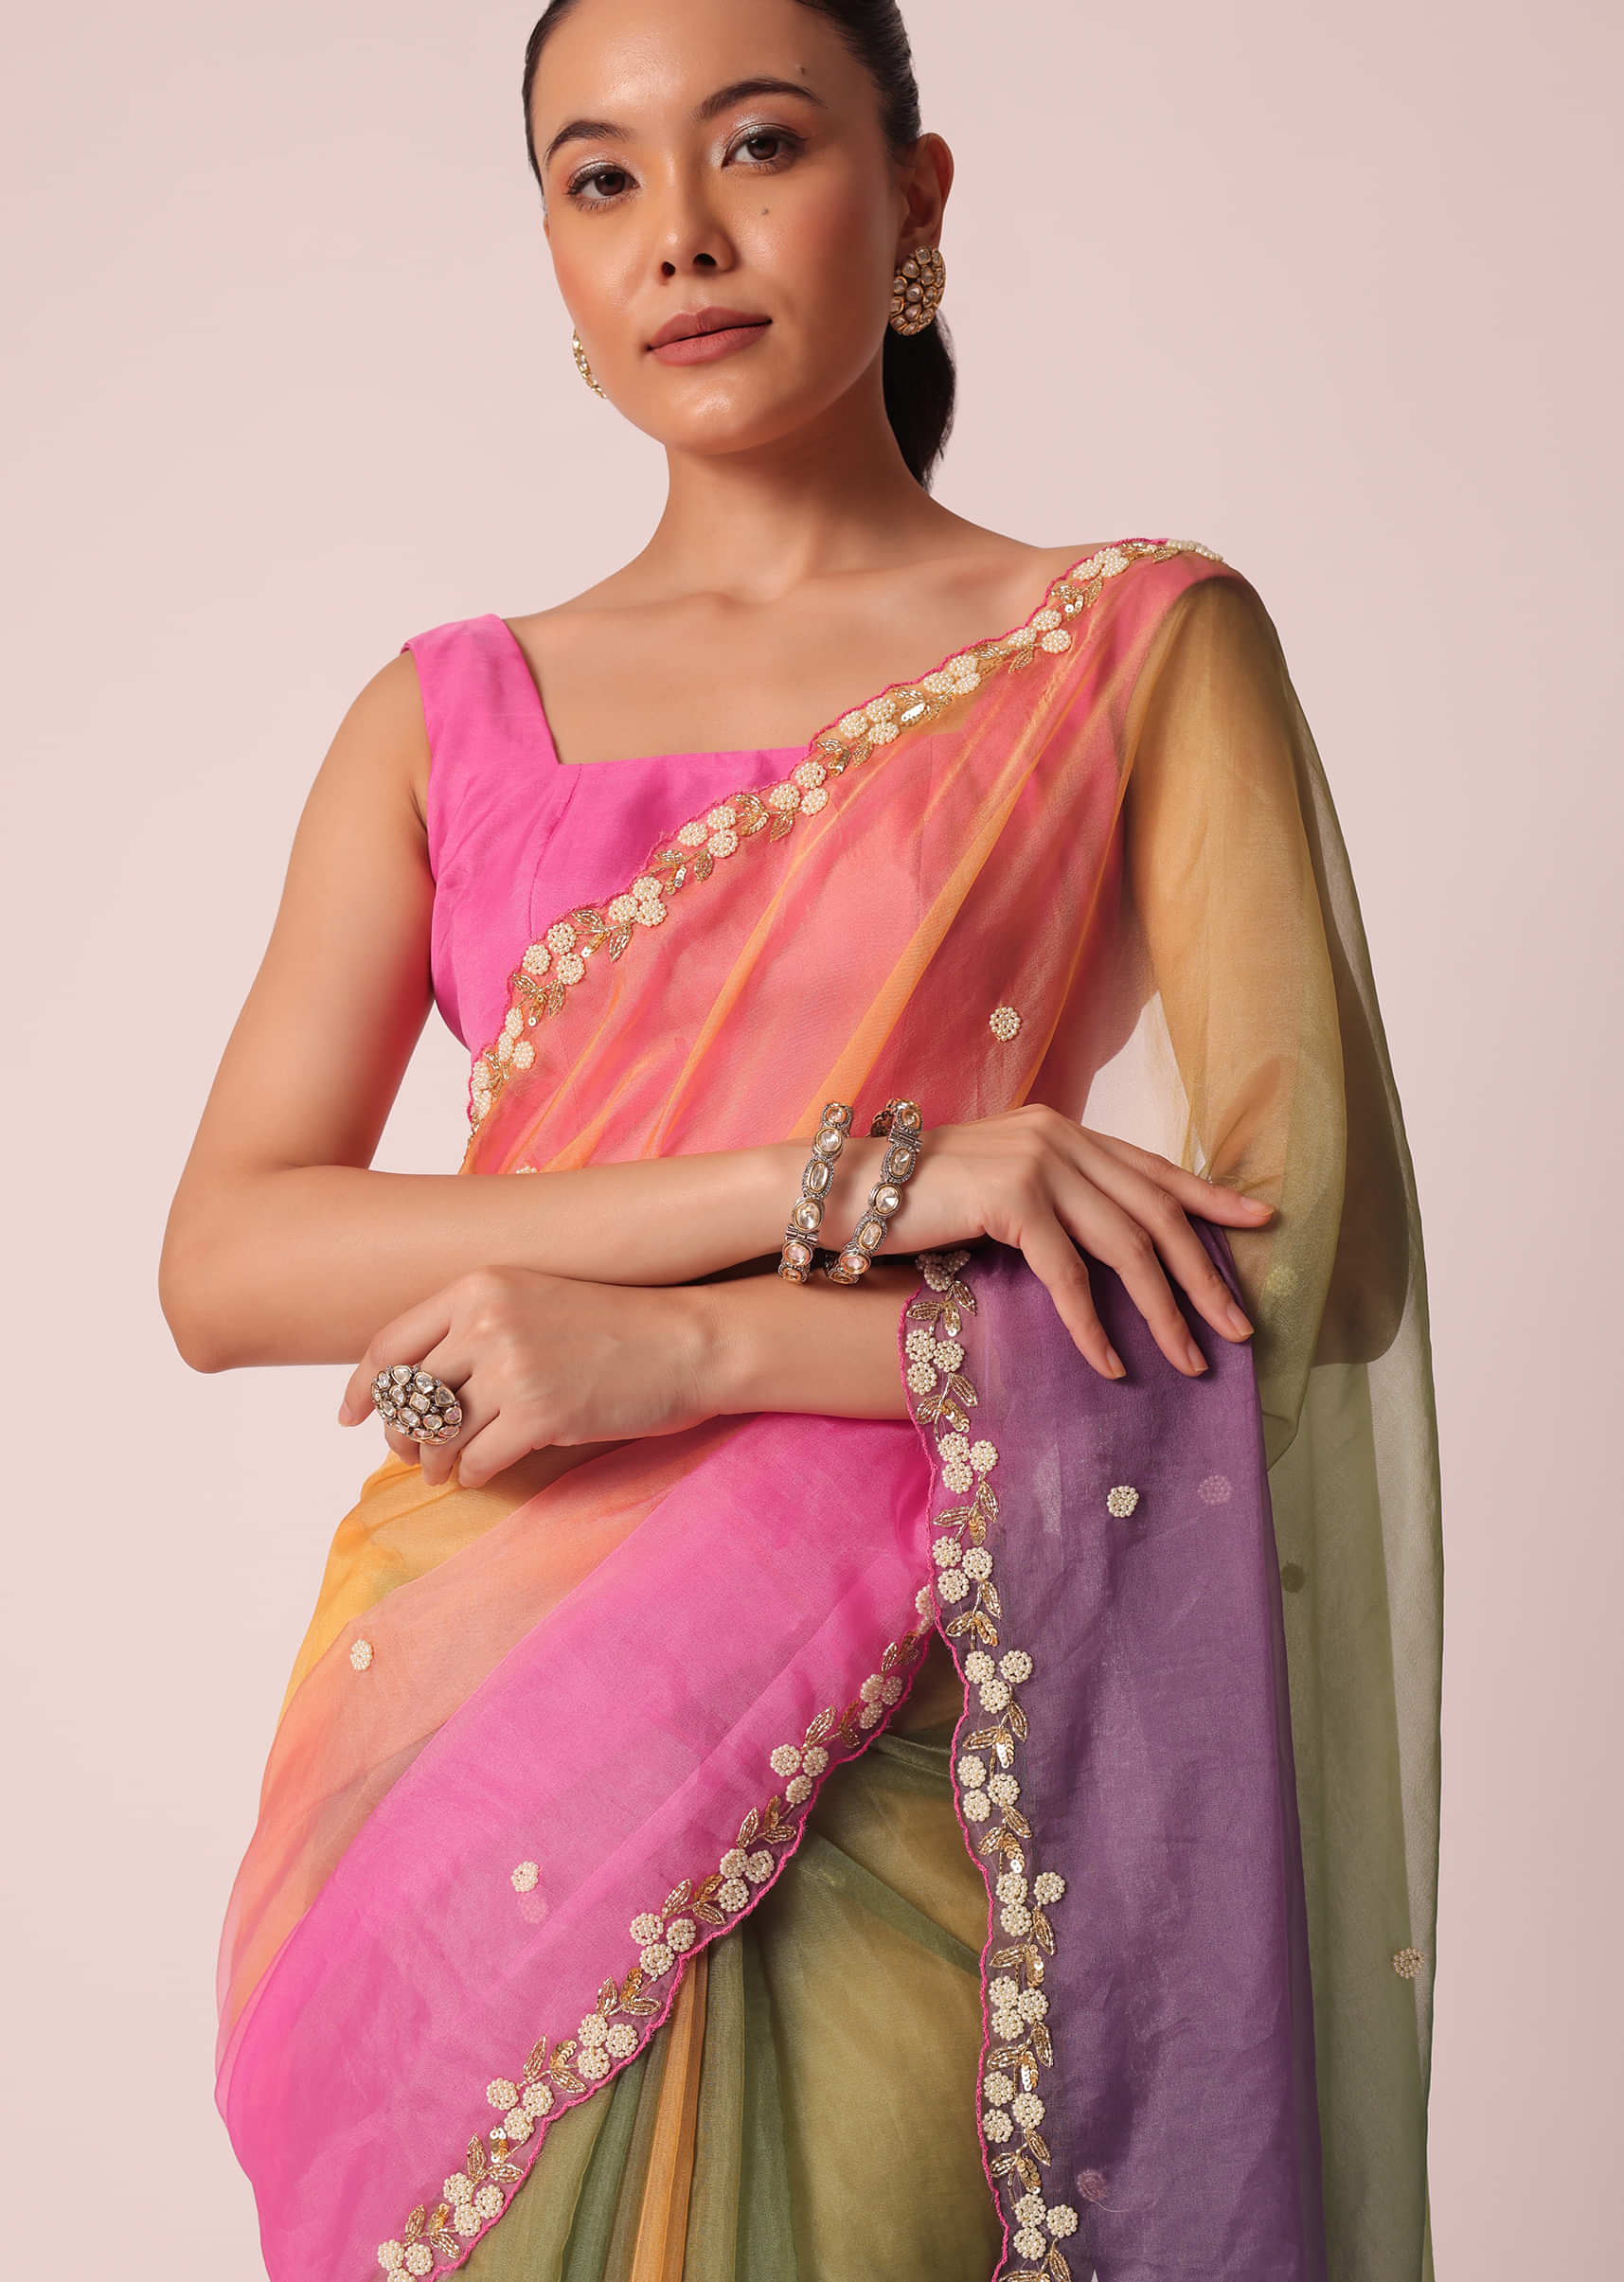 Things to keep in mind while wearing sheer sarees